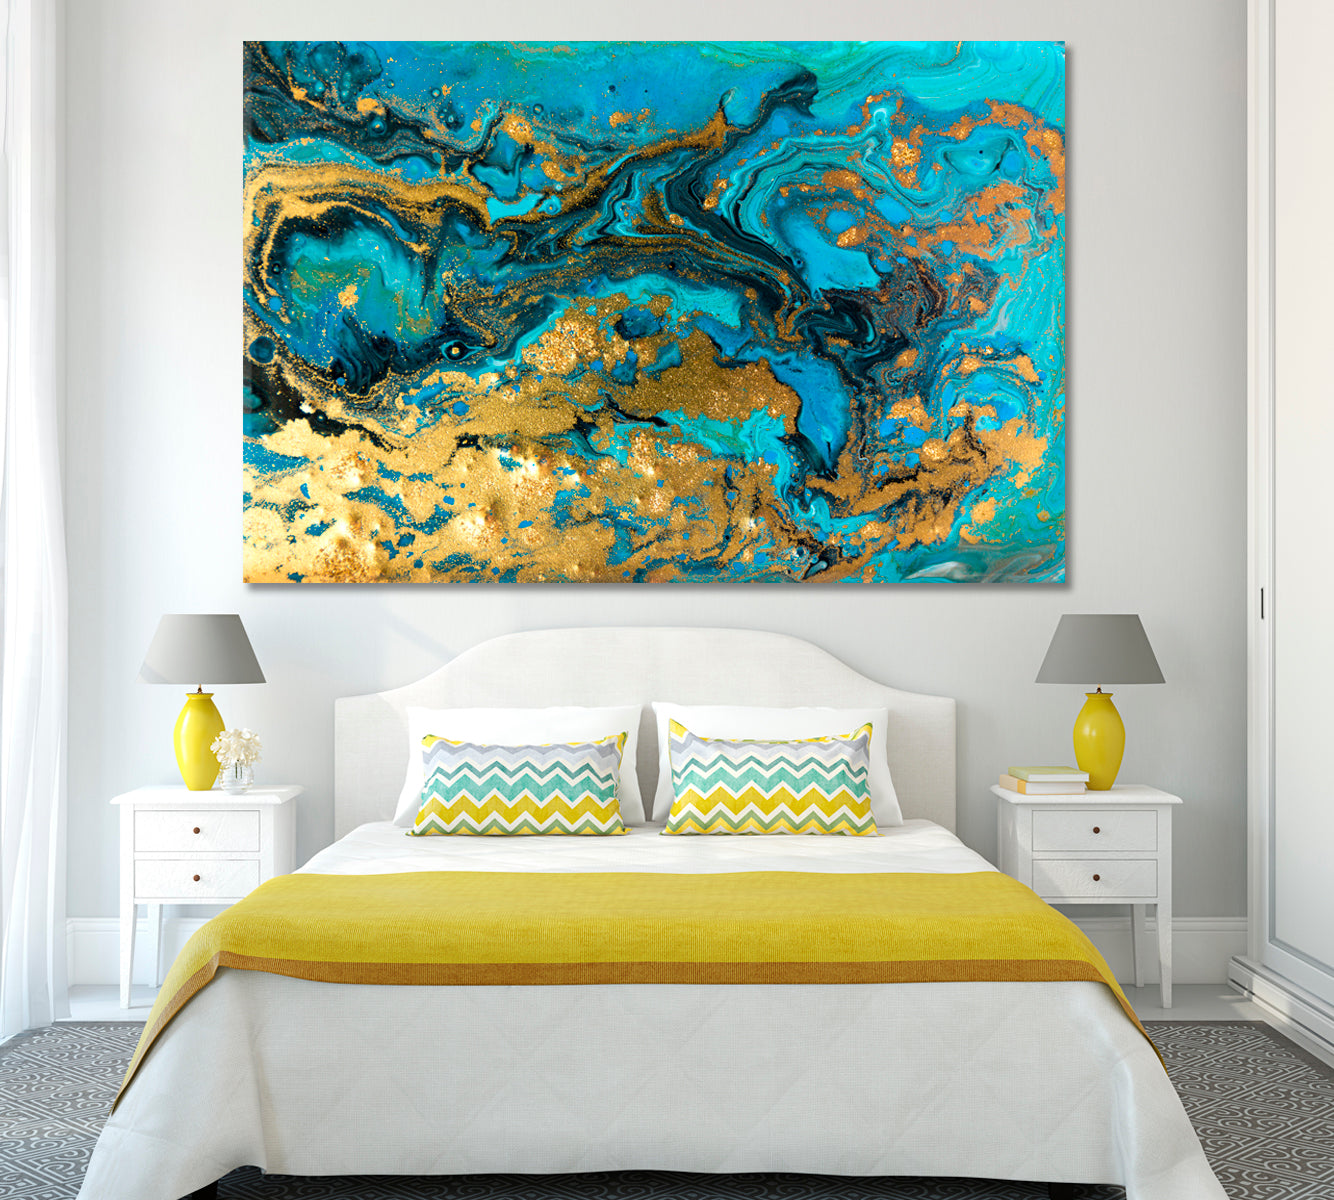 Blue and Gold Marbling Pattern Canvas Print ArtLexy 1 Panel 24"x16" inches 